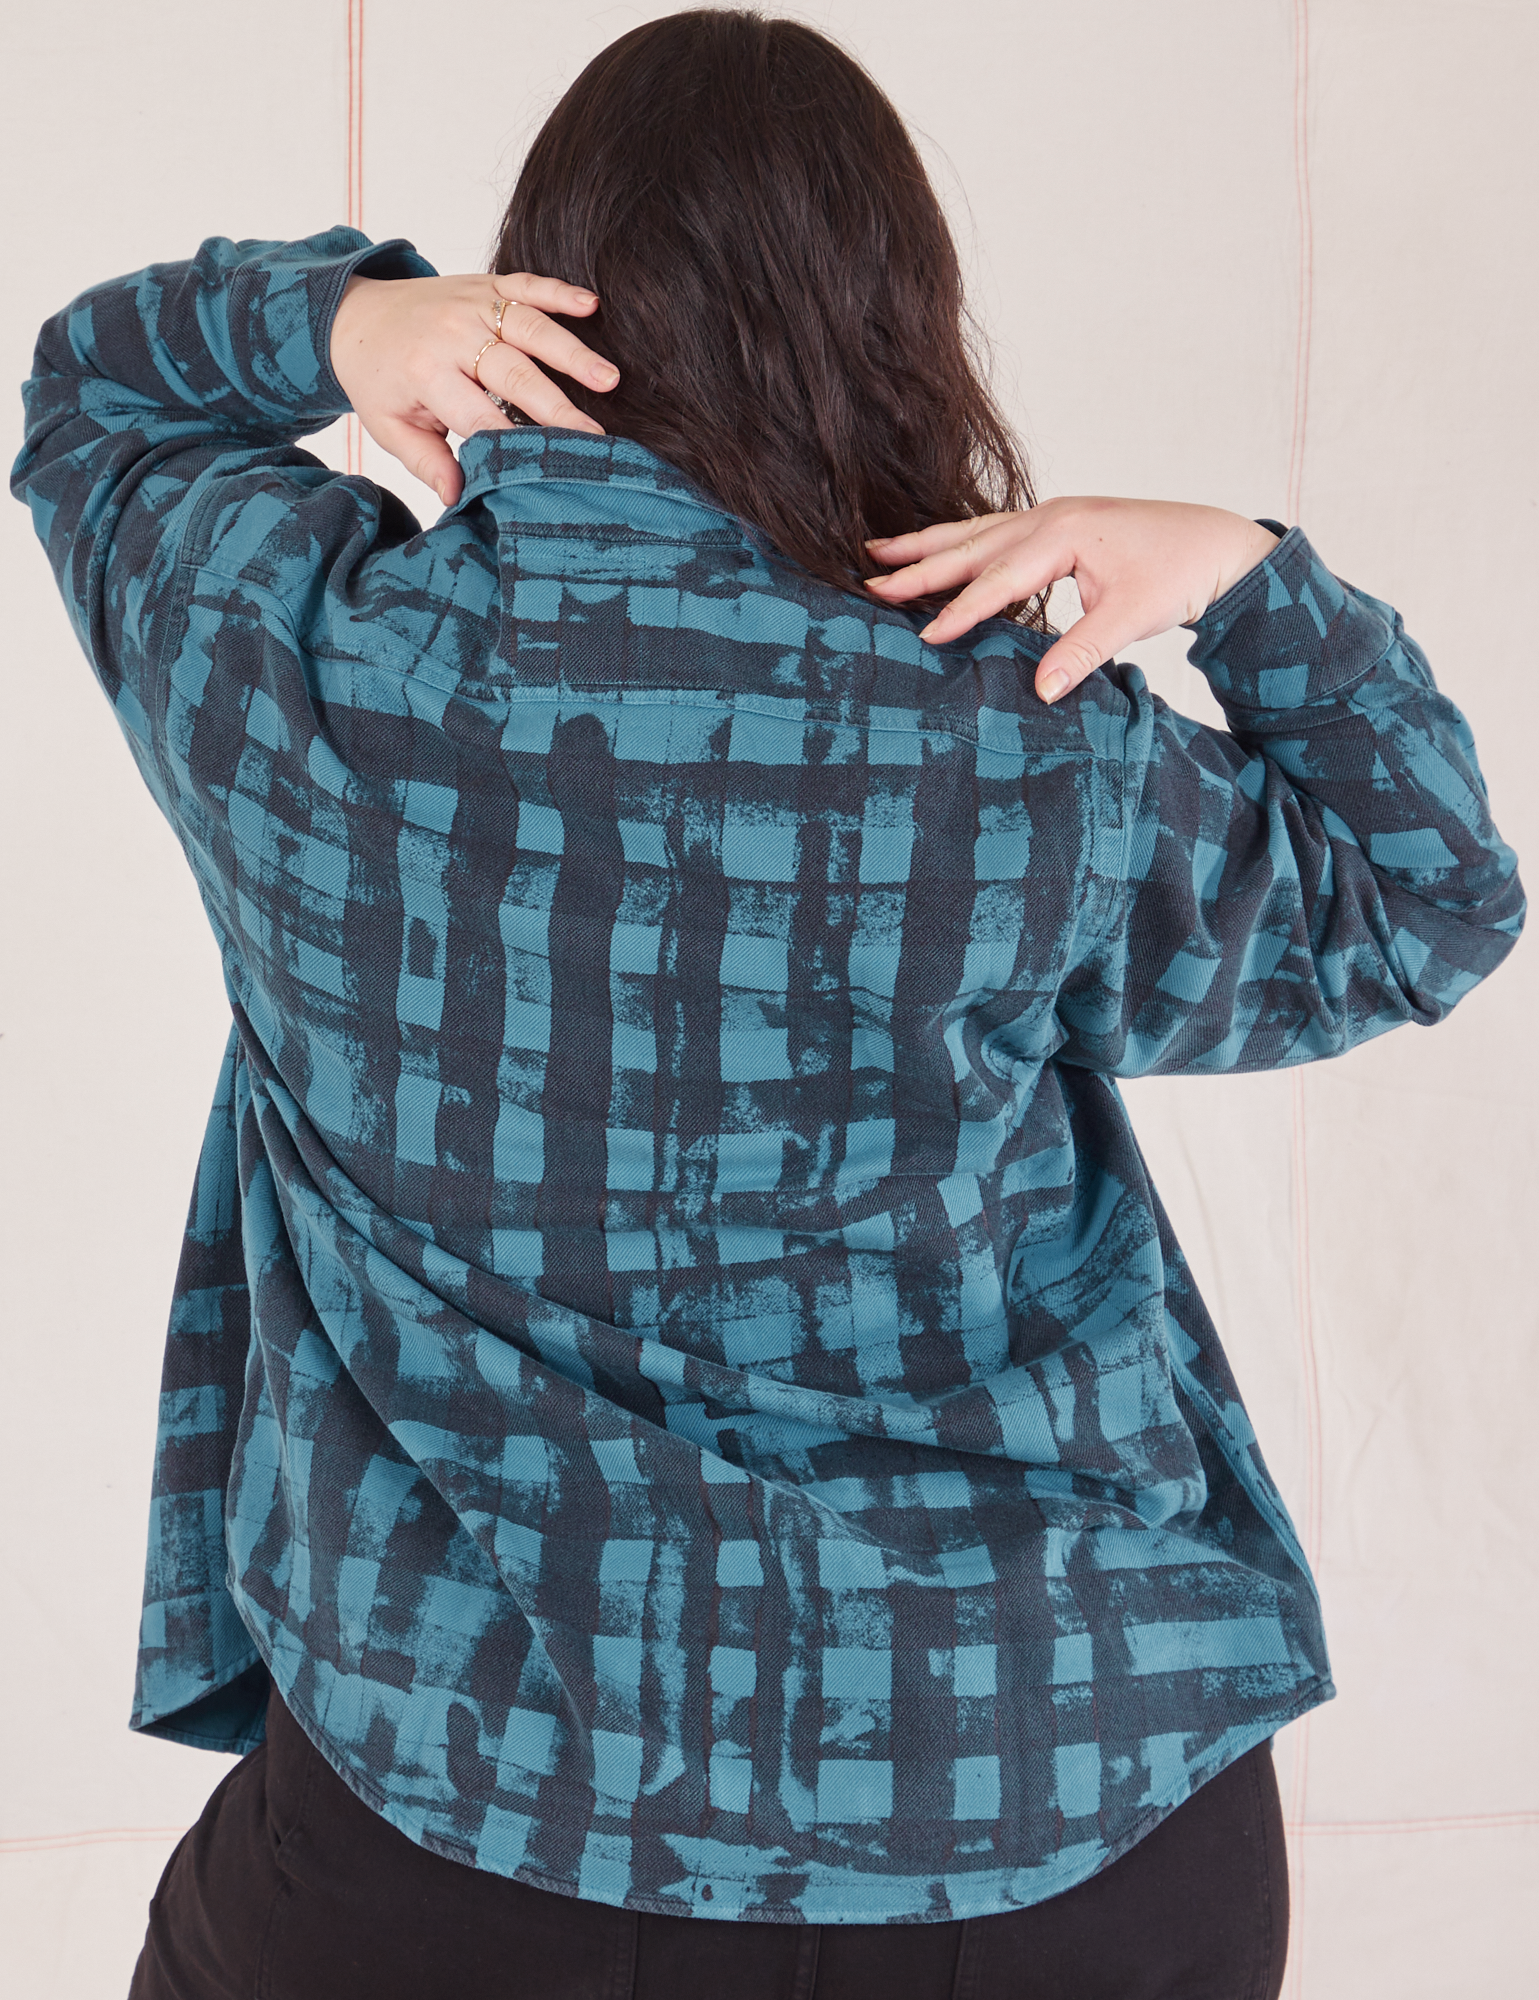 Plaid Flannel Overshirt in Marine Blue back view on Ashley